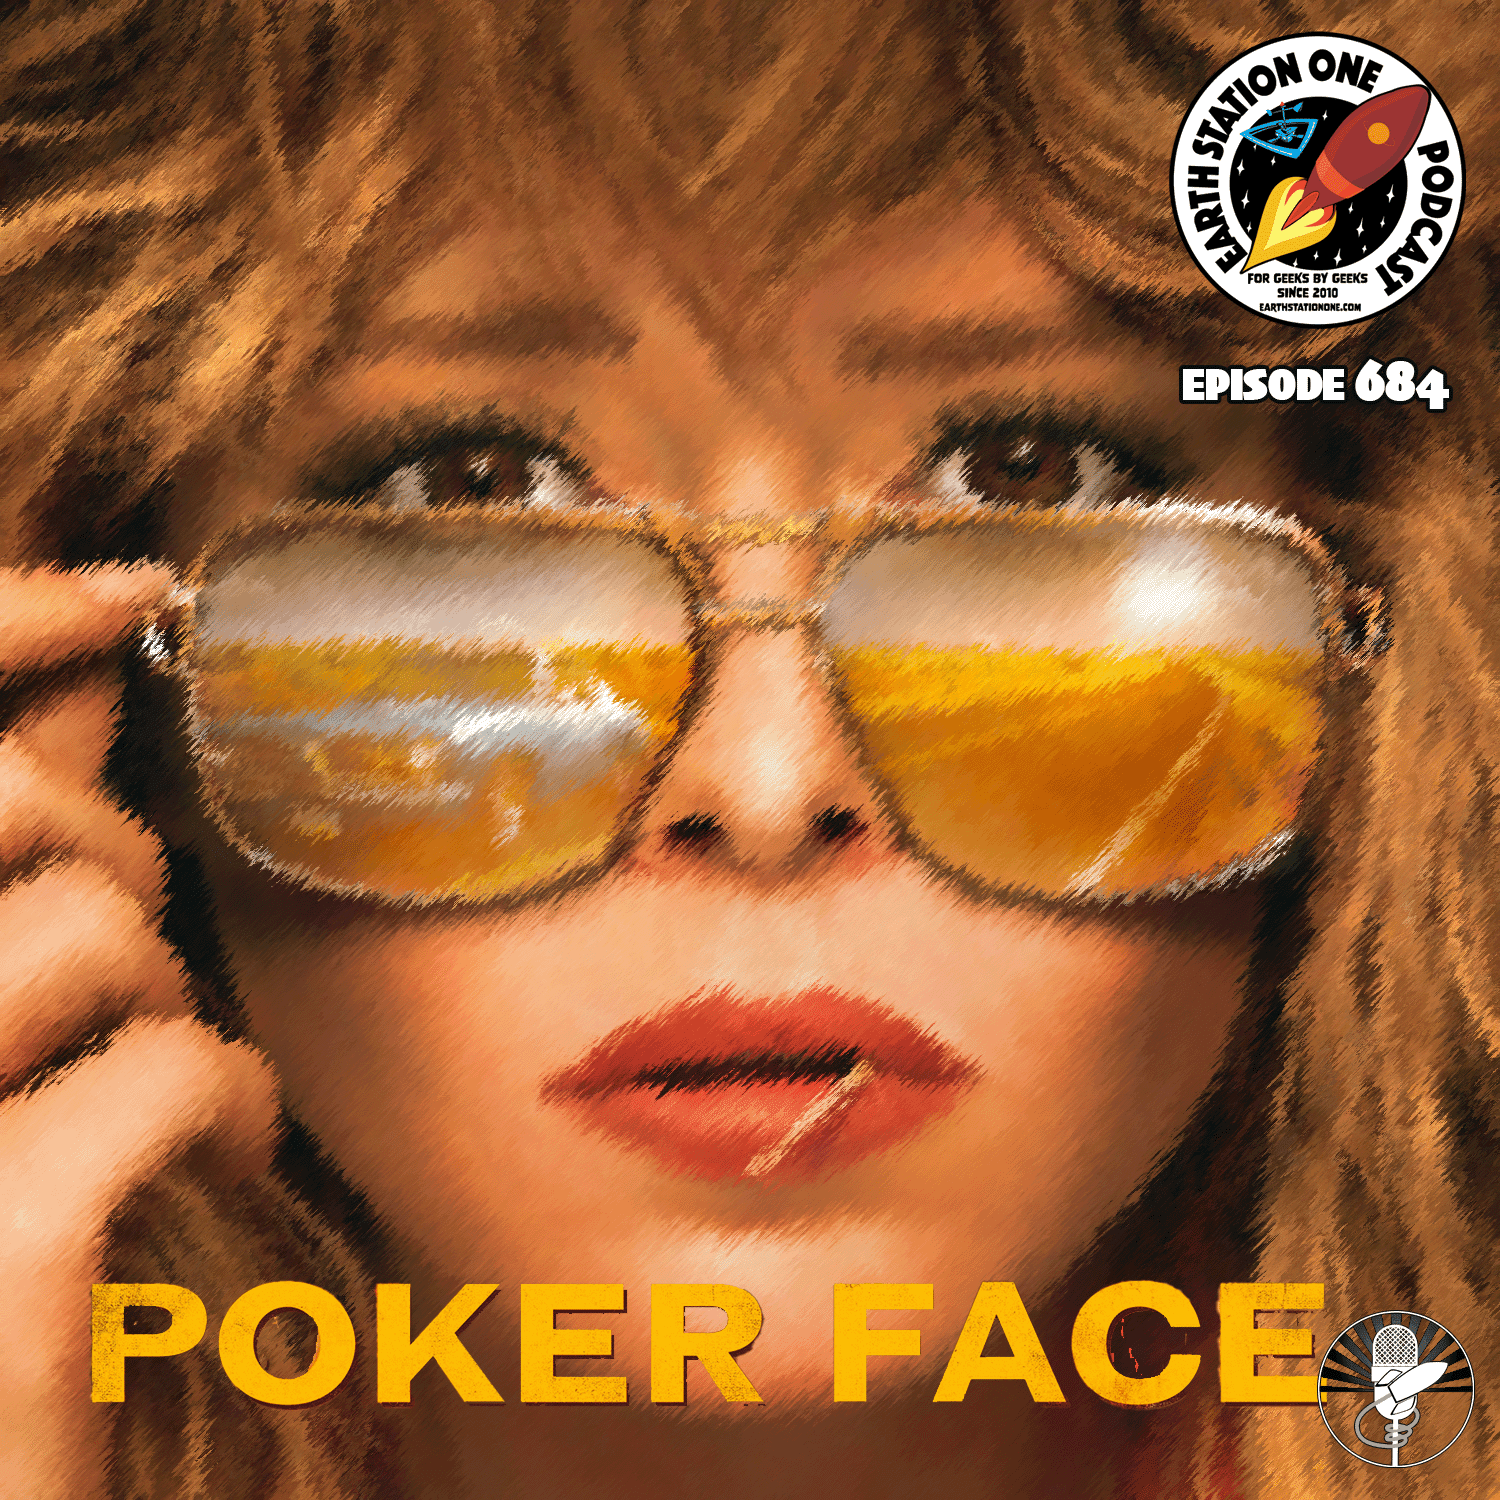 Earth Station One Ep 684 - Poker Face